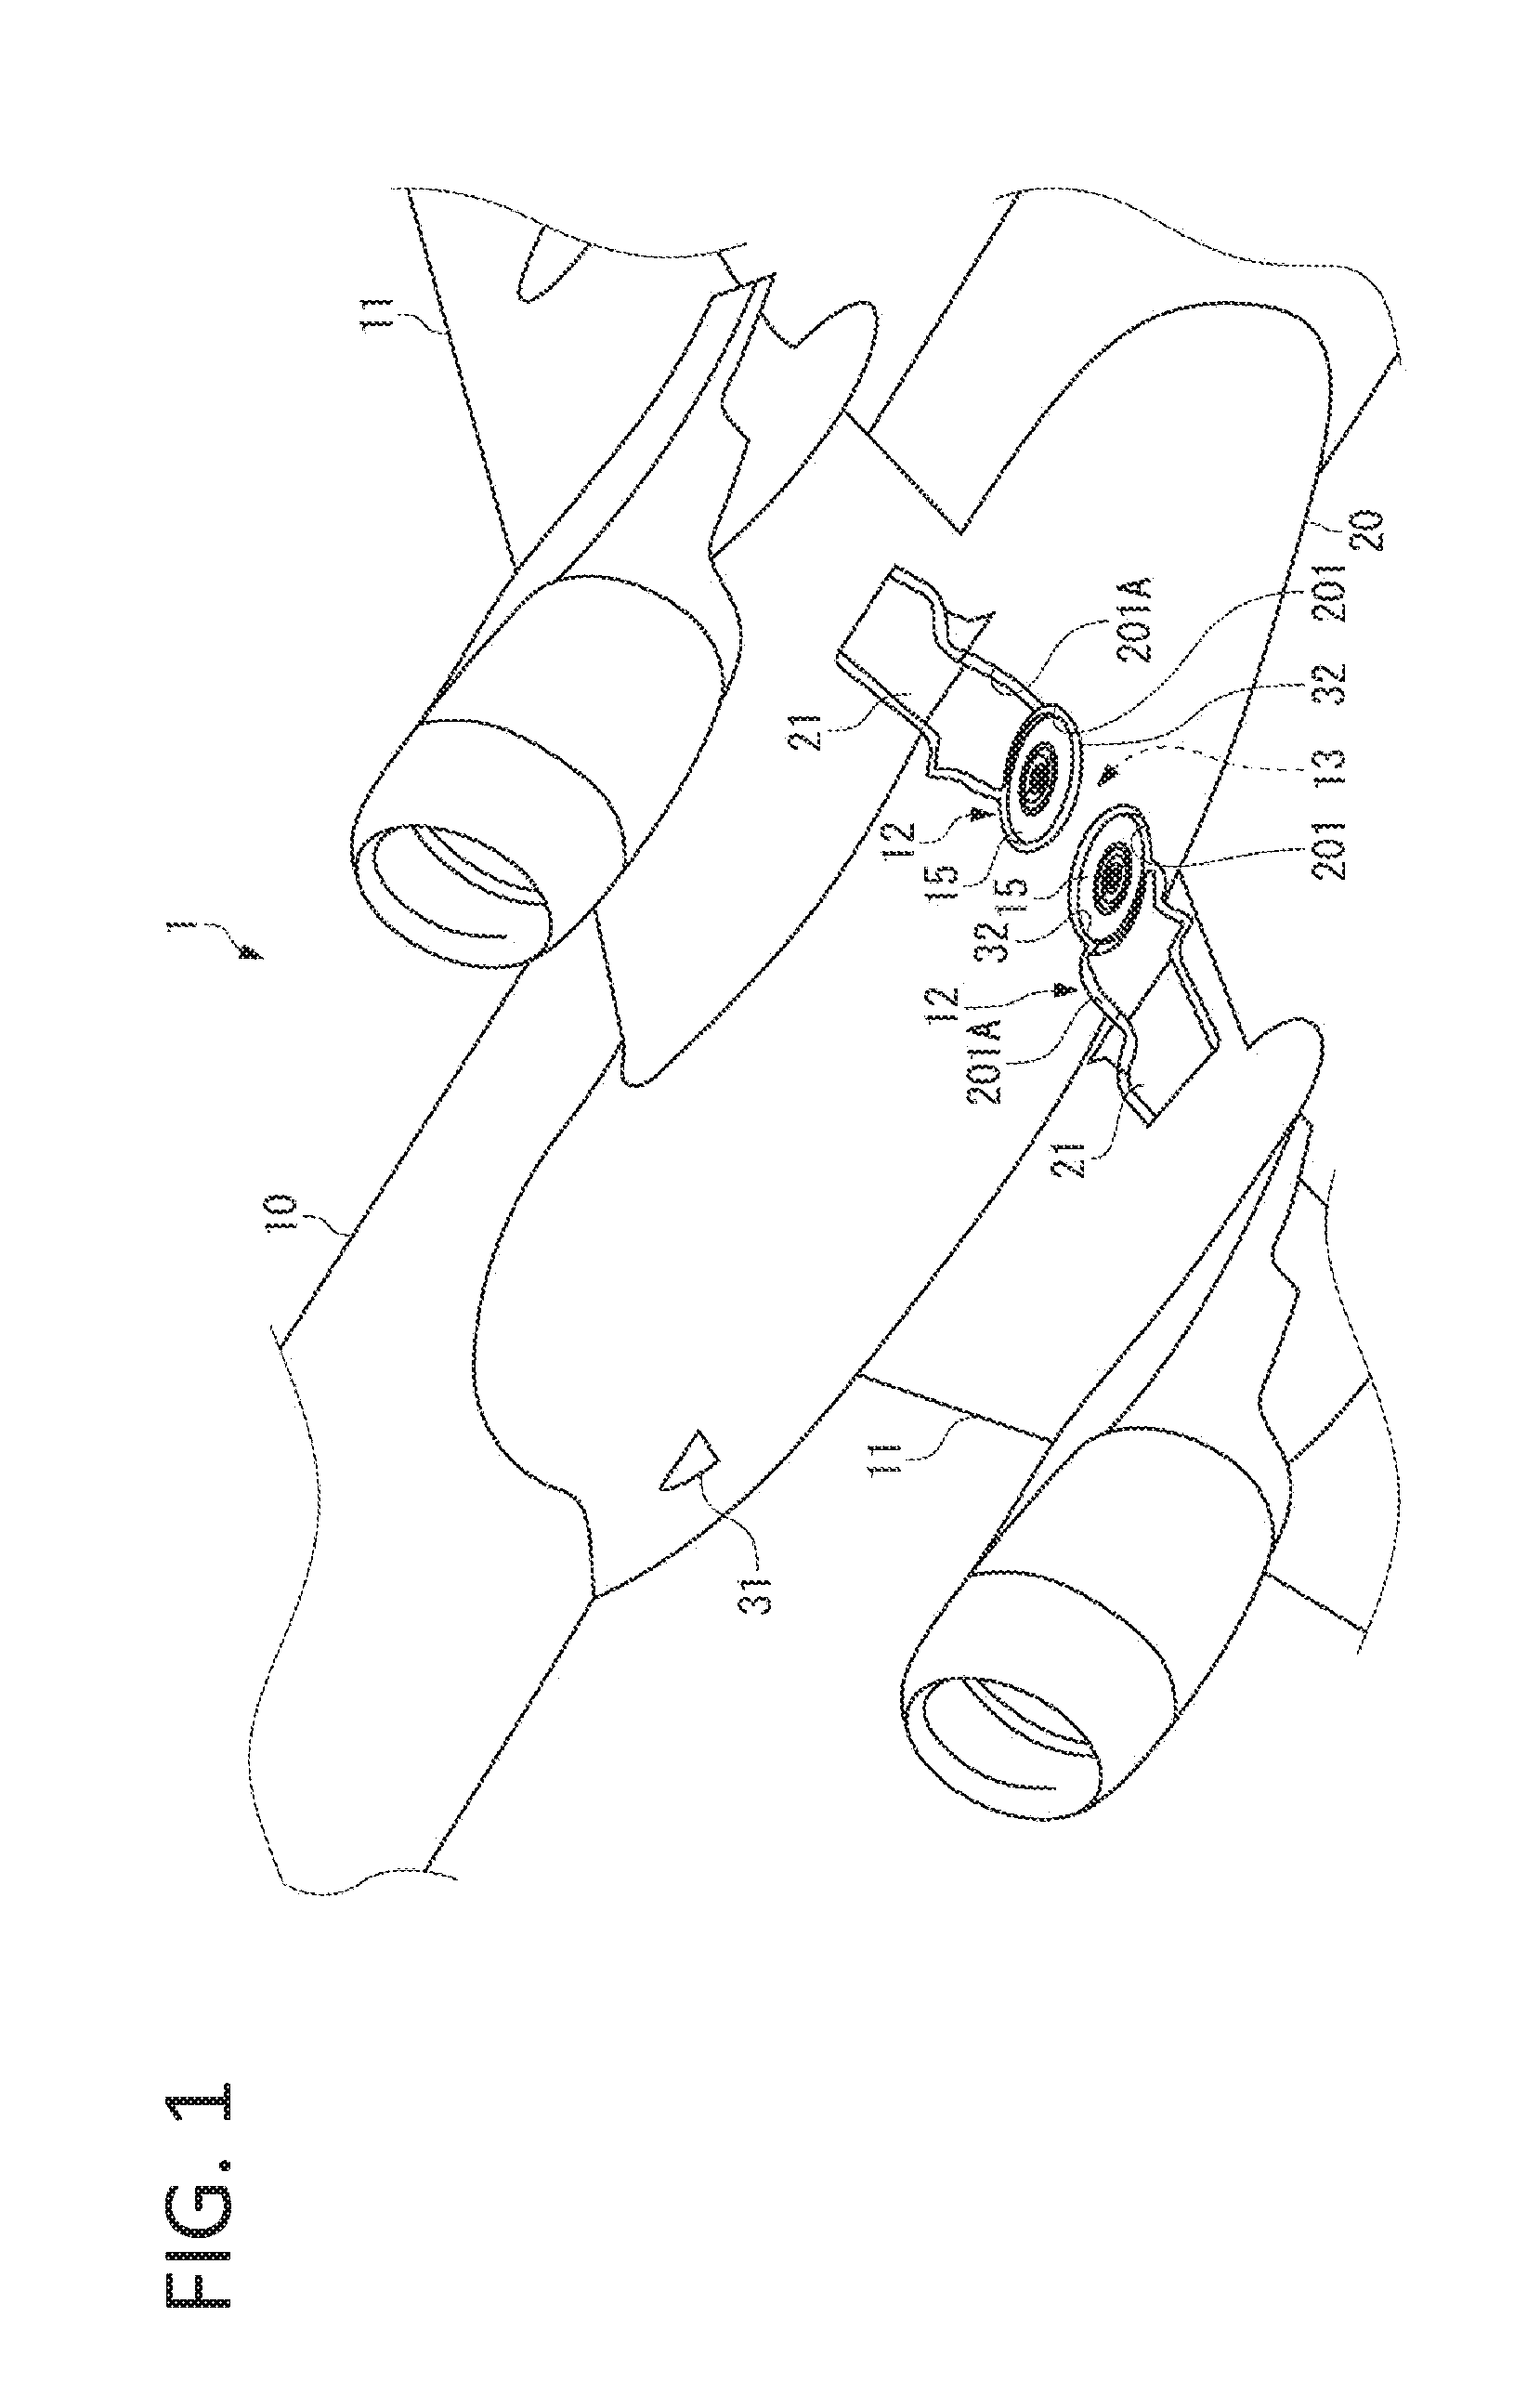 Heat removal structure of aircraft main landing gear bay